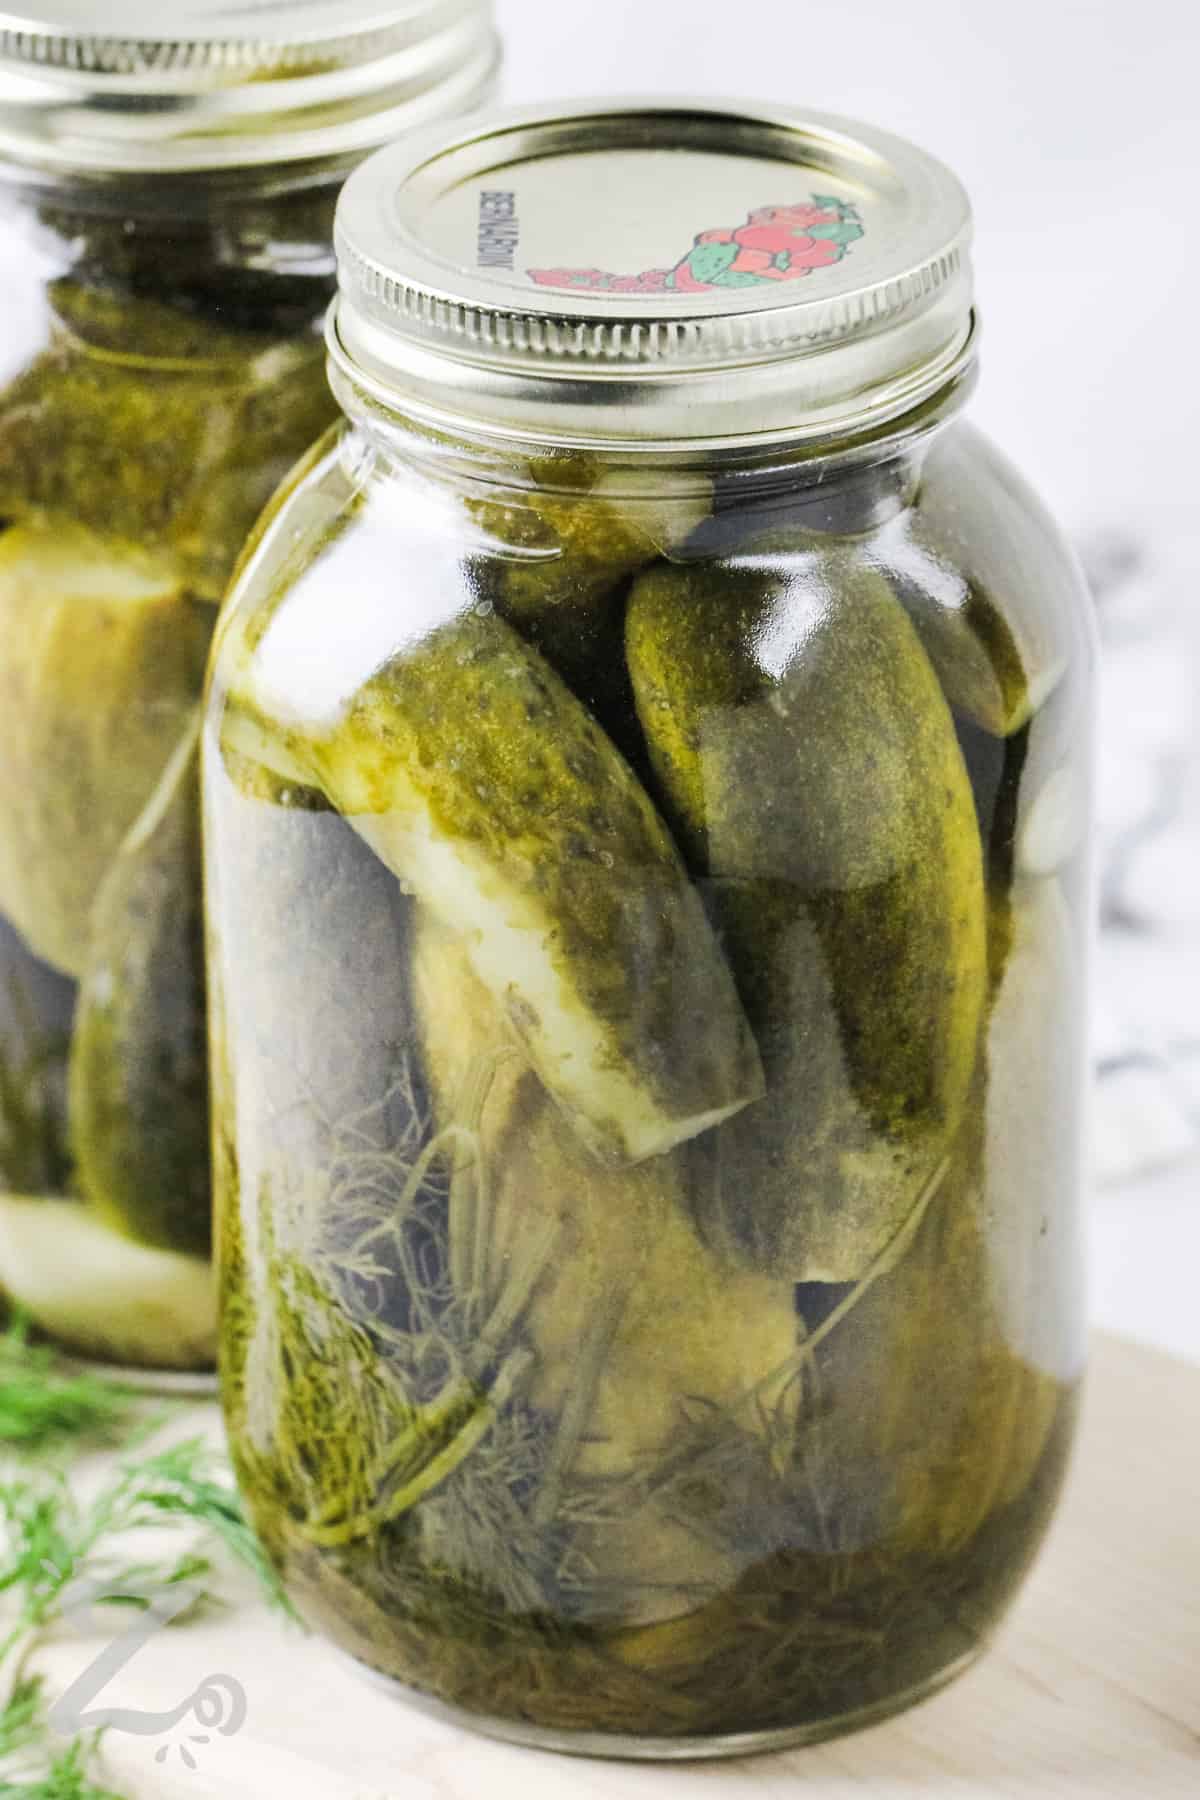 Two jars of prepared dill pickles